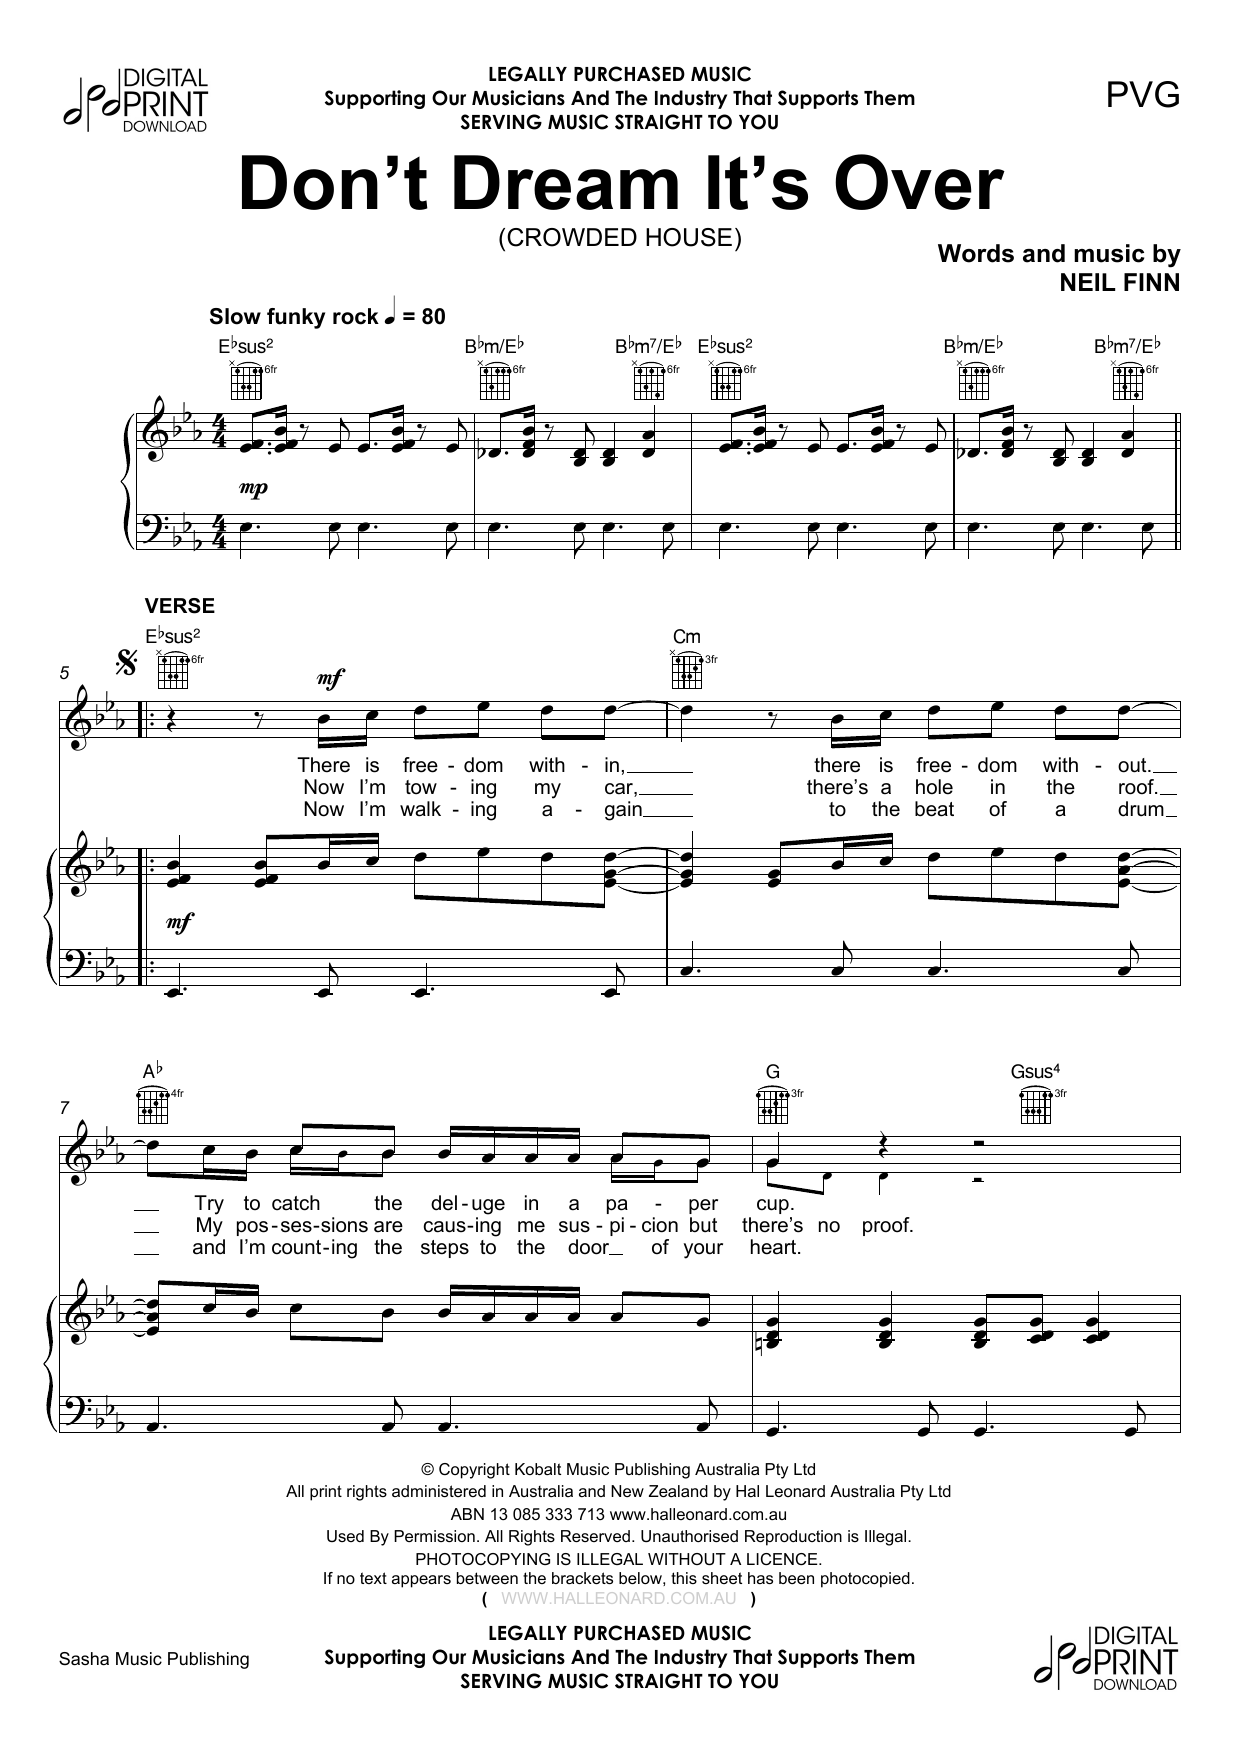 Download Crowded House Don't Dream Its Over Sheet Music